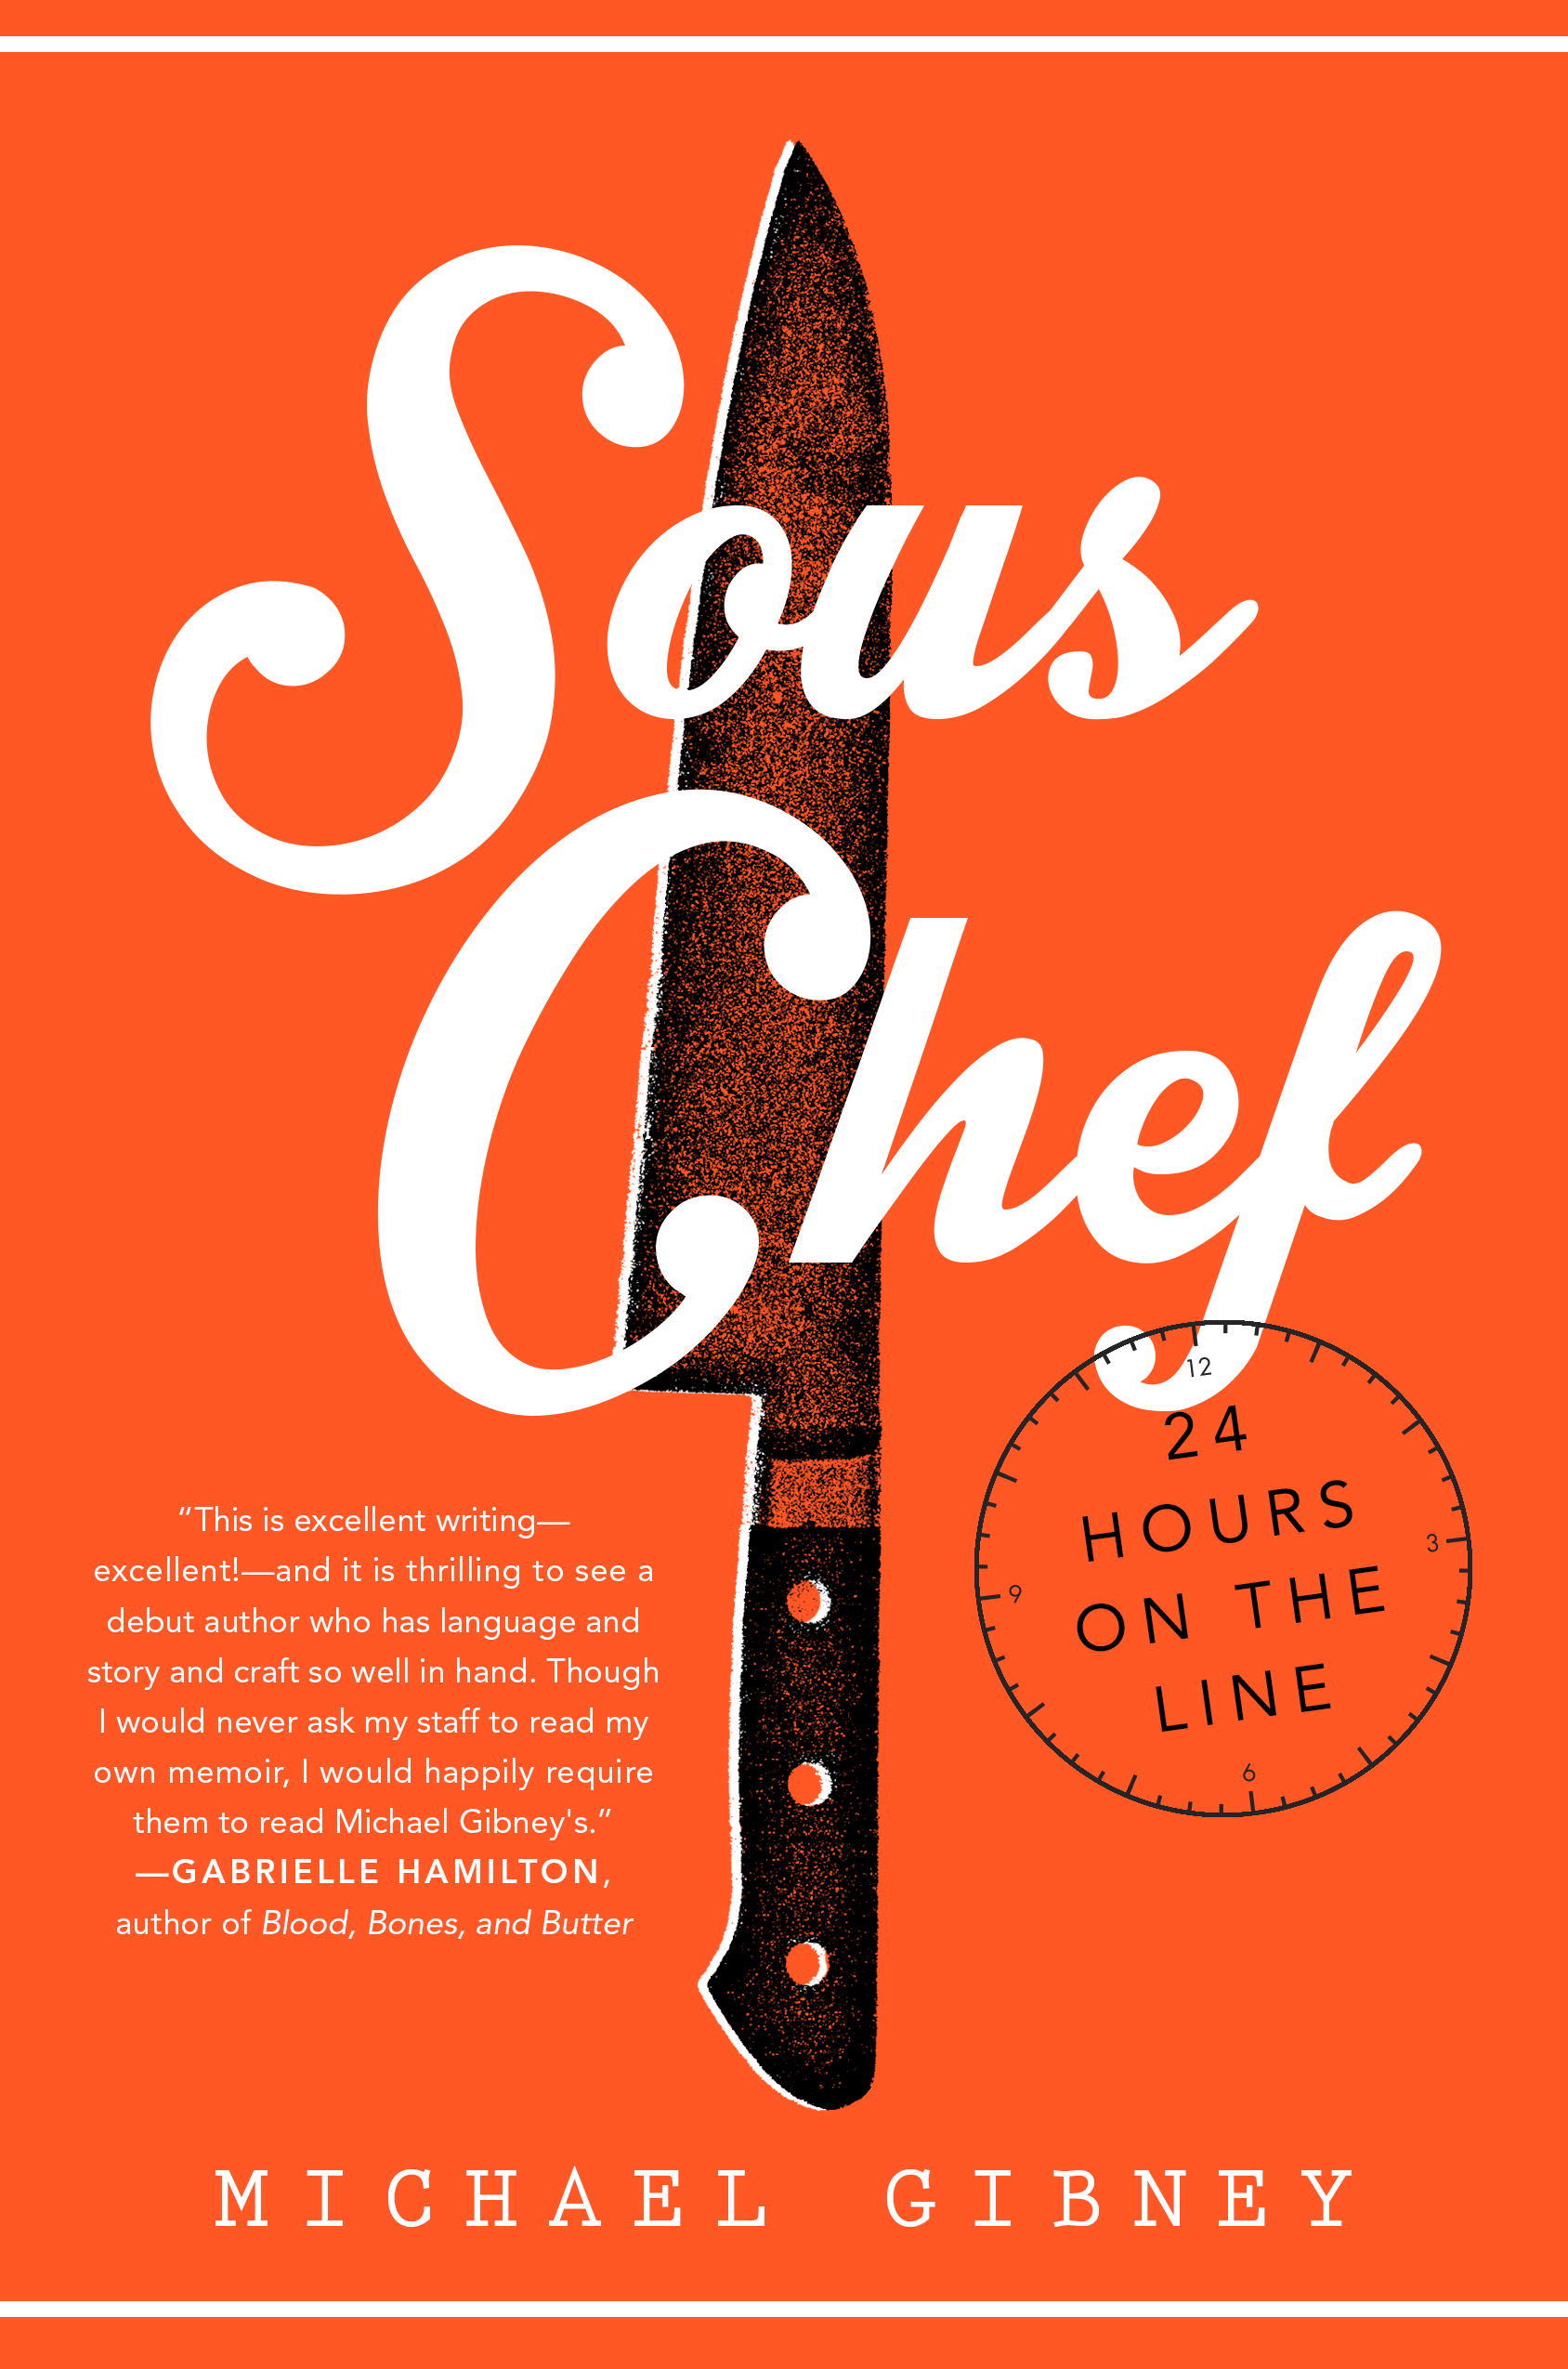 Sous Chef debuts today.